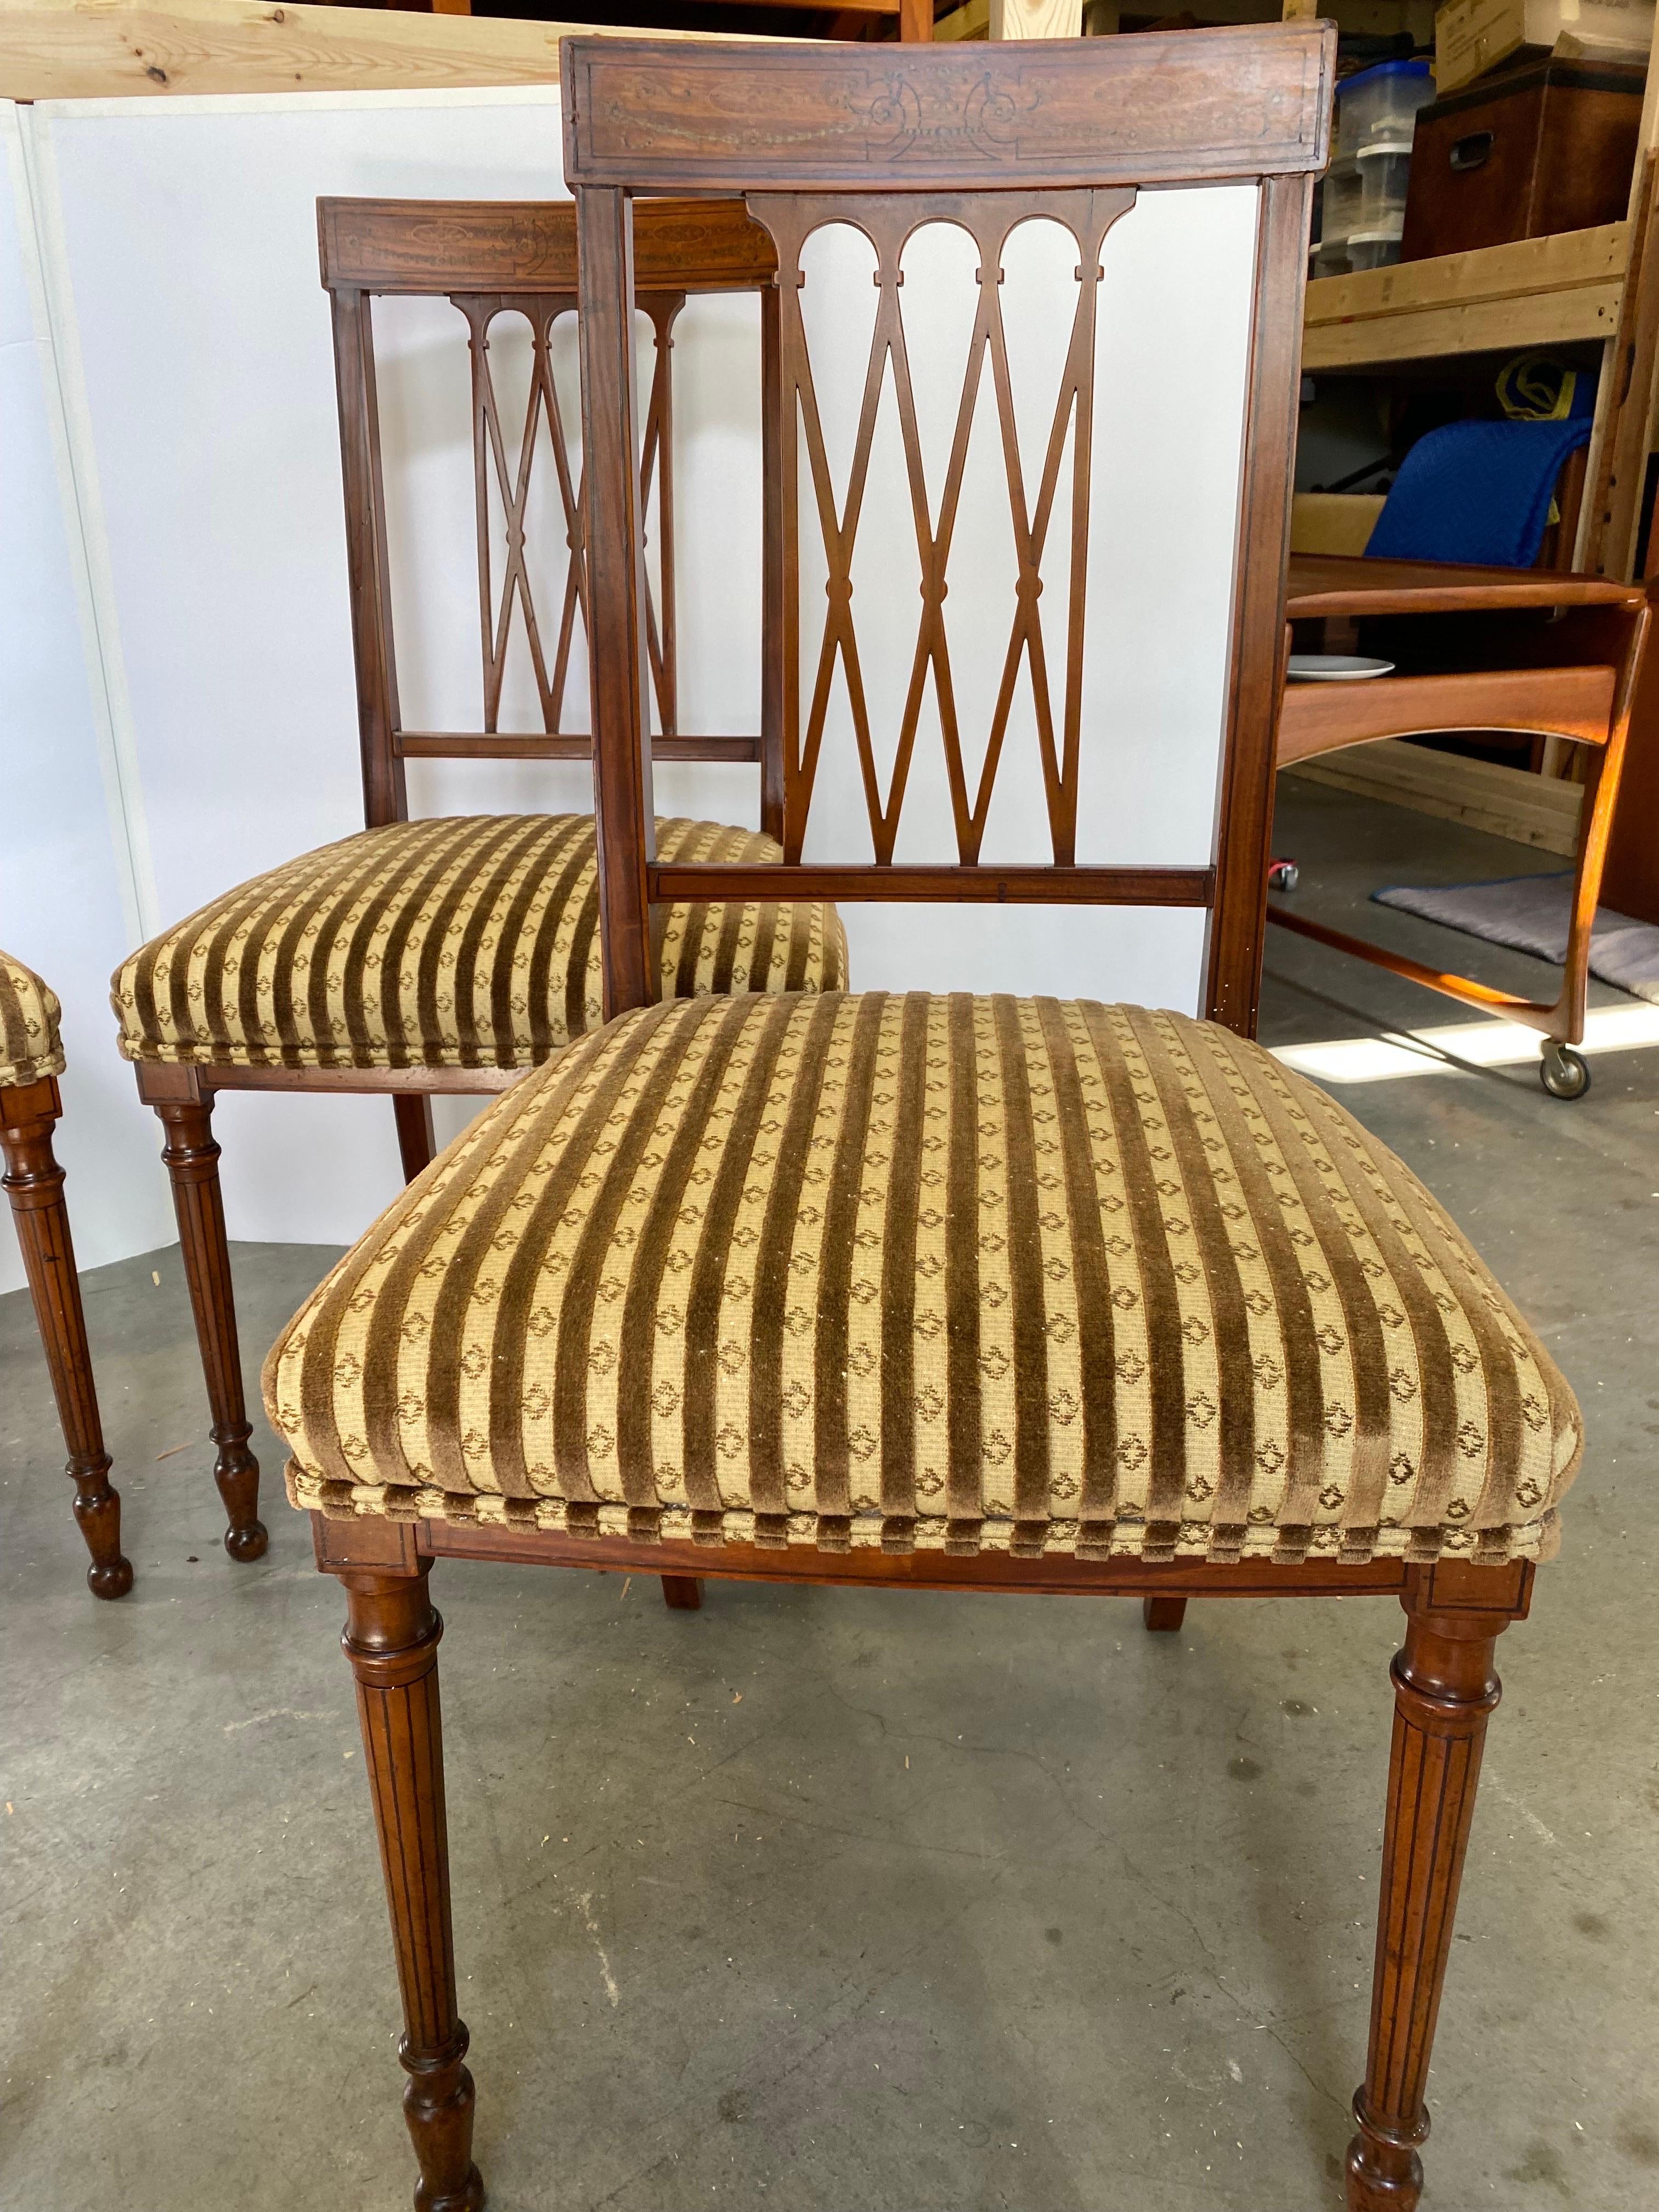 Elegant set of four Edwardian side chairs in fruitwood with delicate inlay on the back rail and on the turned legs.  The lattice form backs with inlaid top rail with expensive velvet stripe fabric on the seats.  Teh finish has been professionally